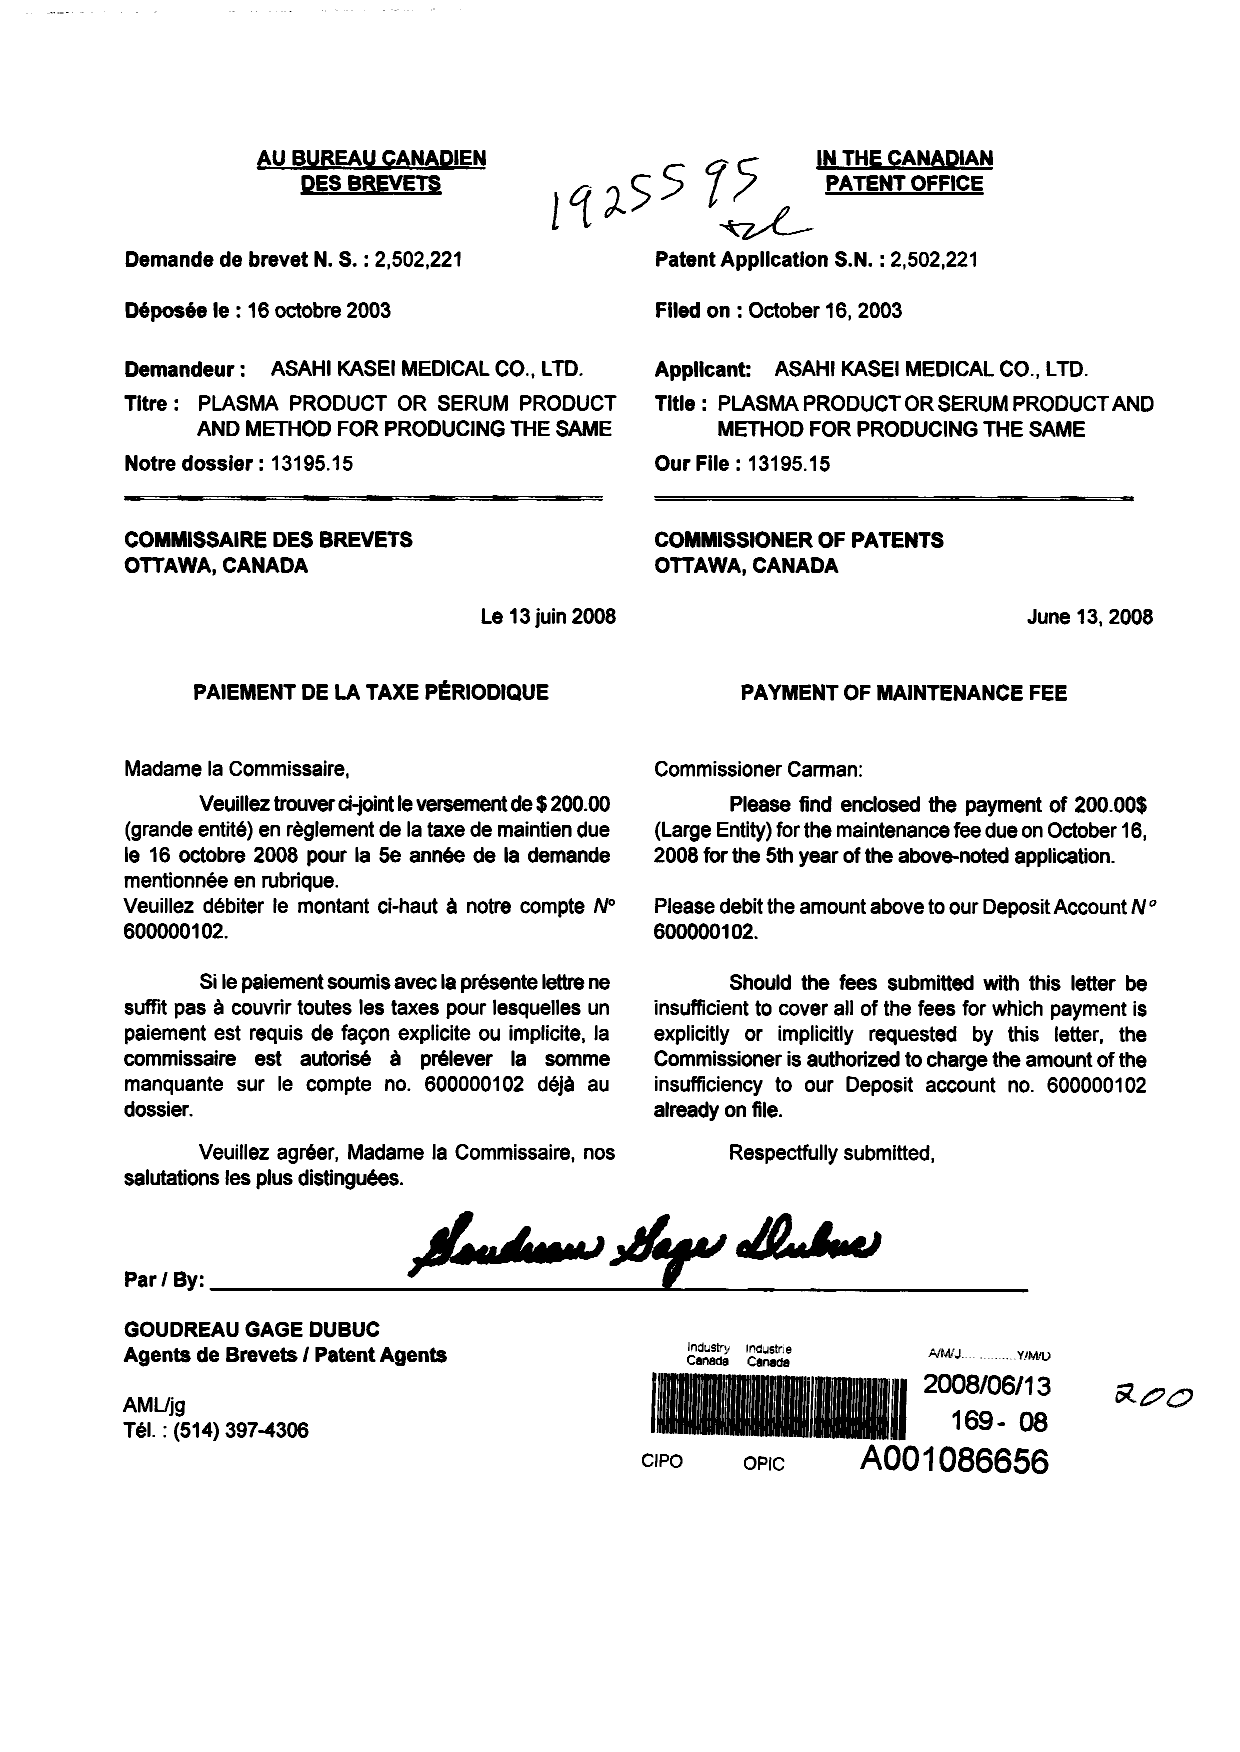 Canadian Patent Document 2502221. Fees 20080613. Image 1 of 1